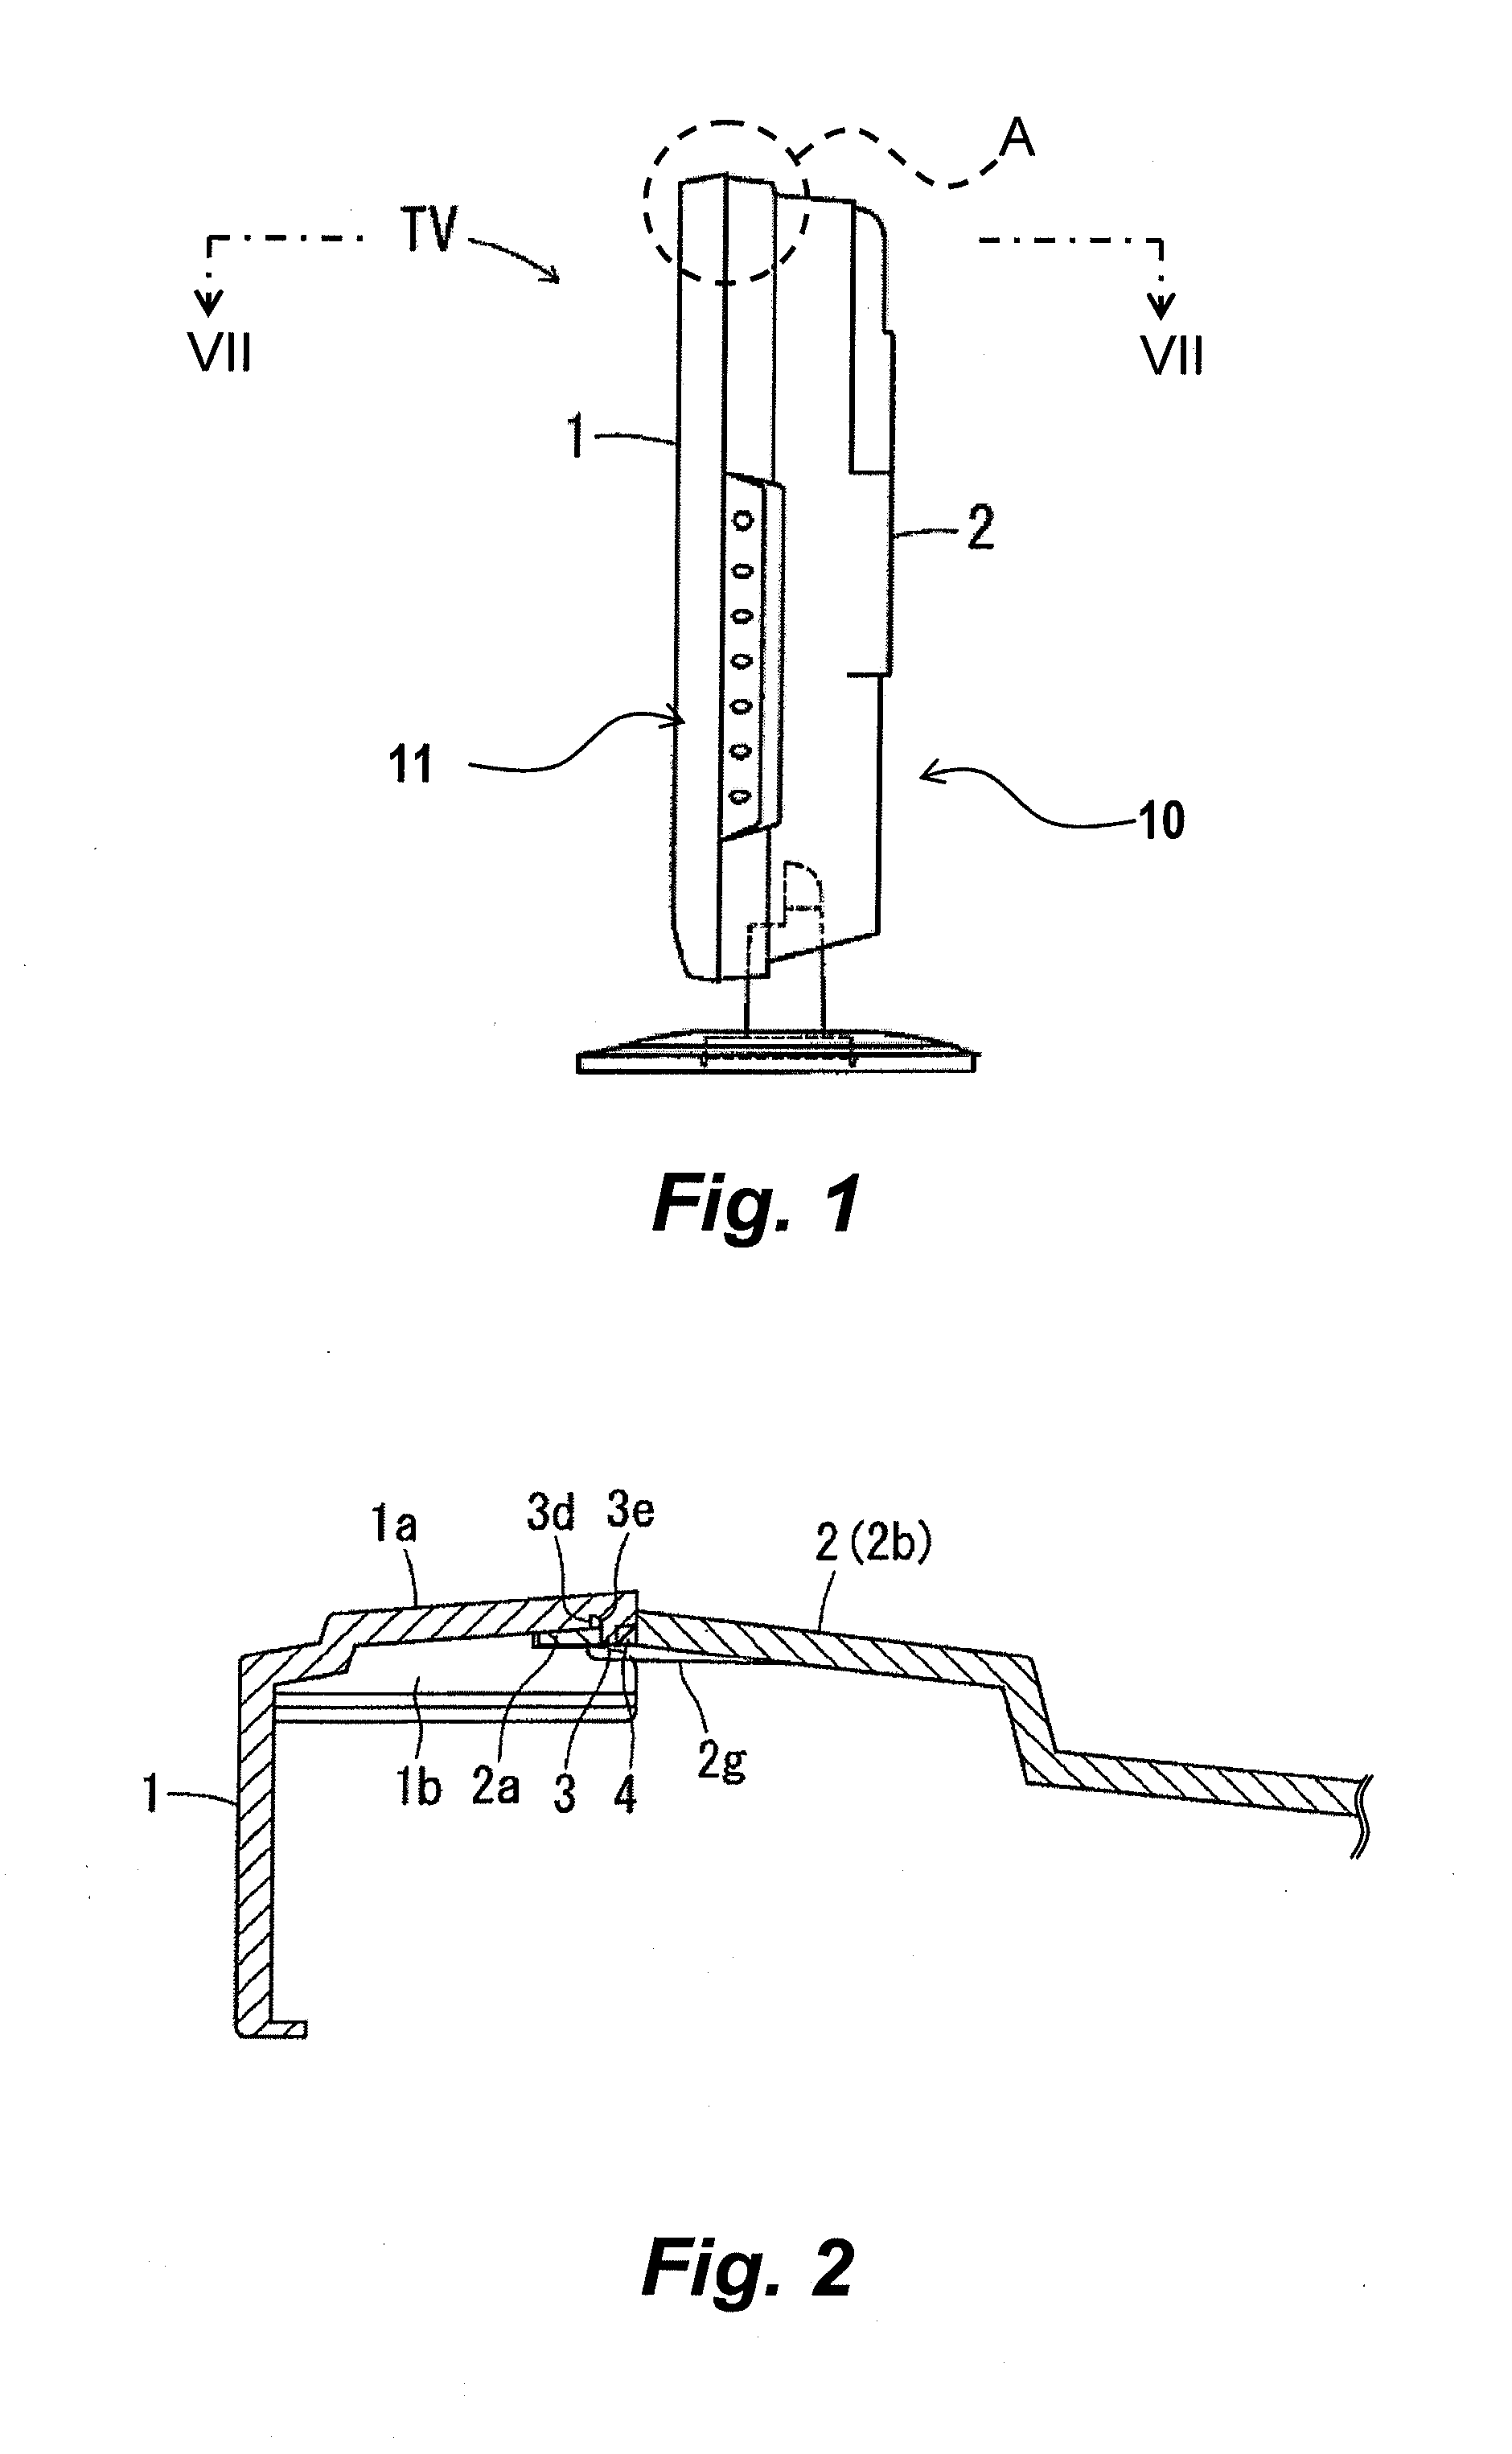 Cabinet for electronic device